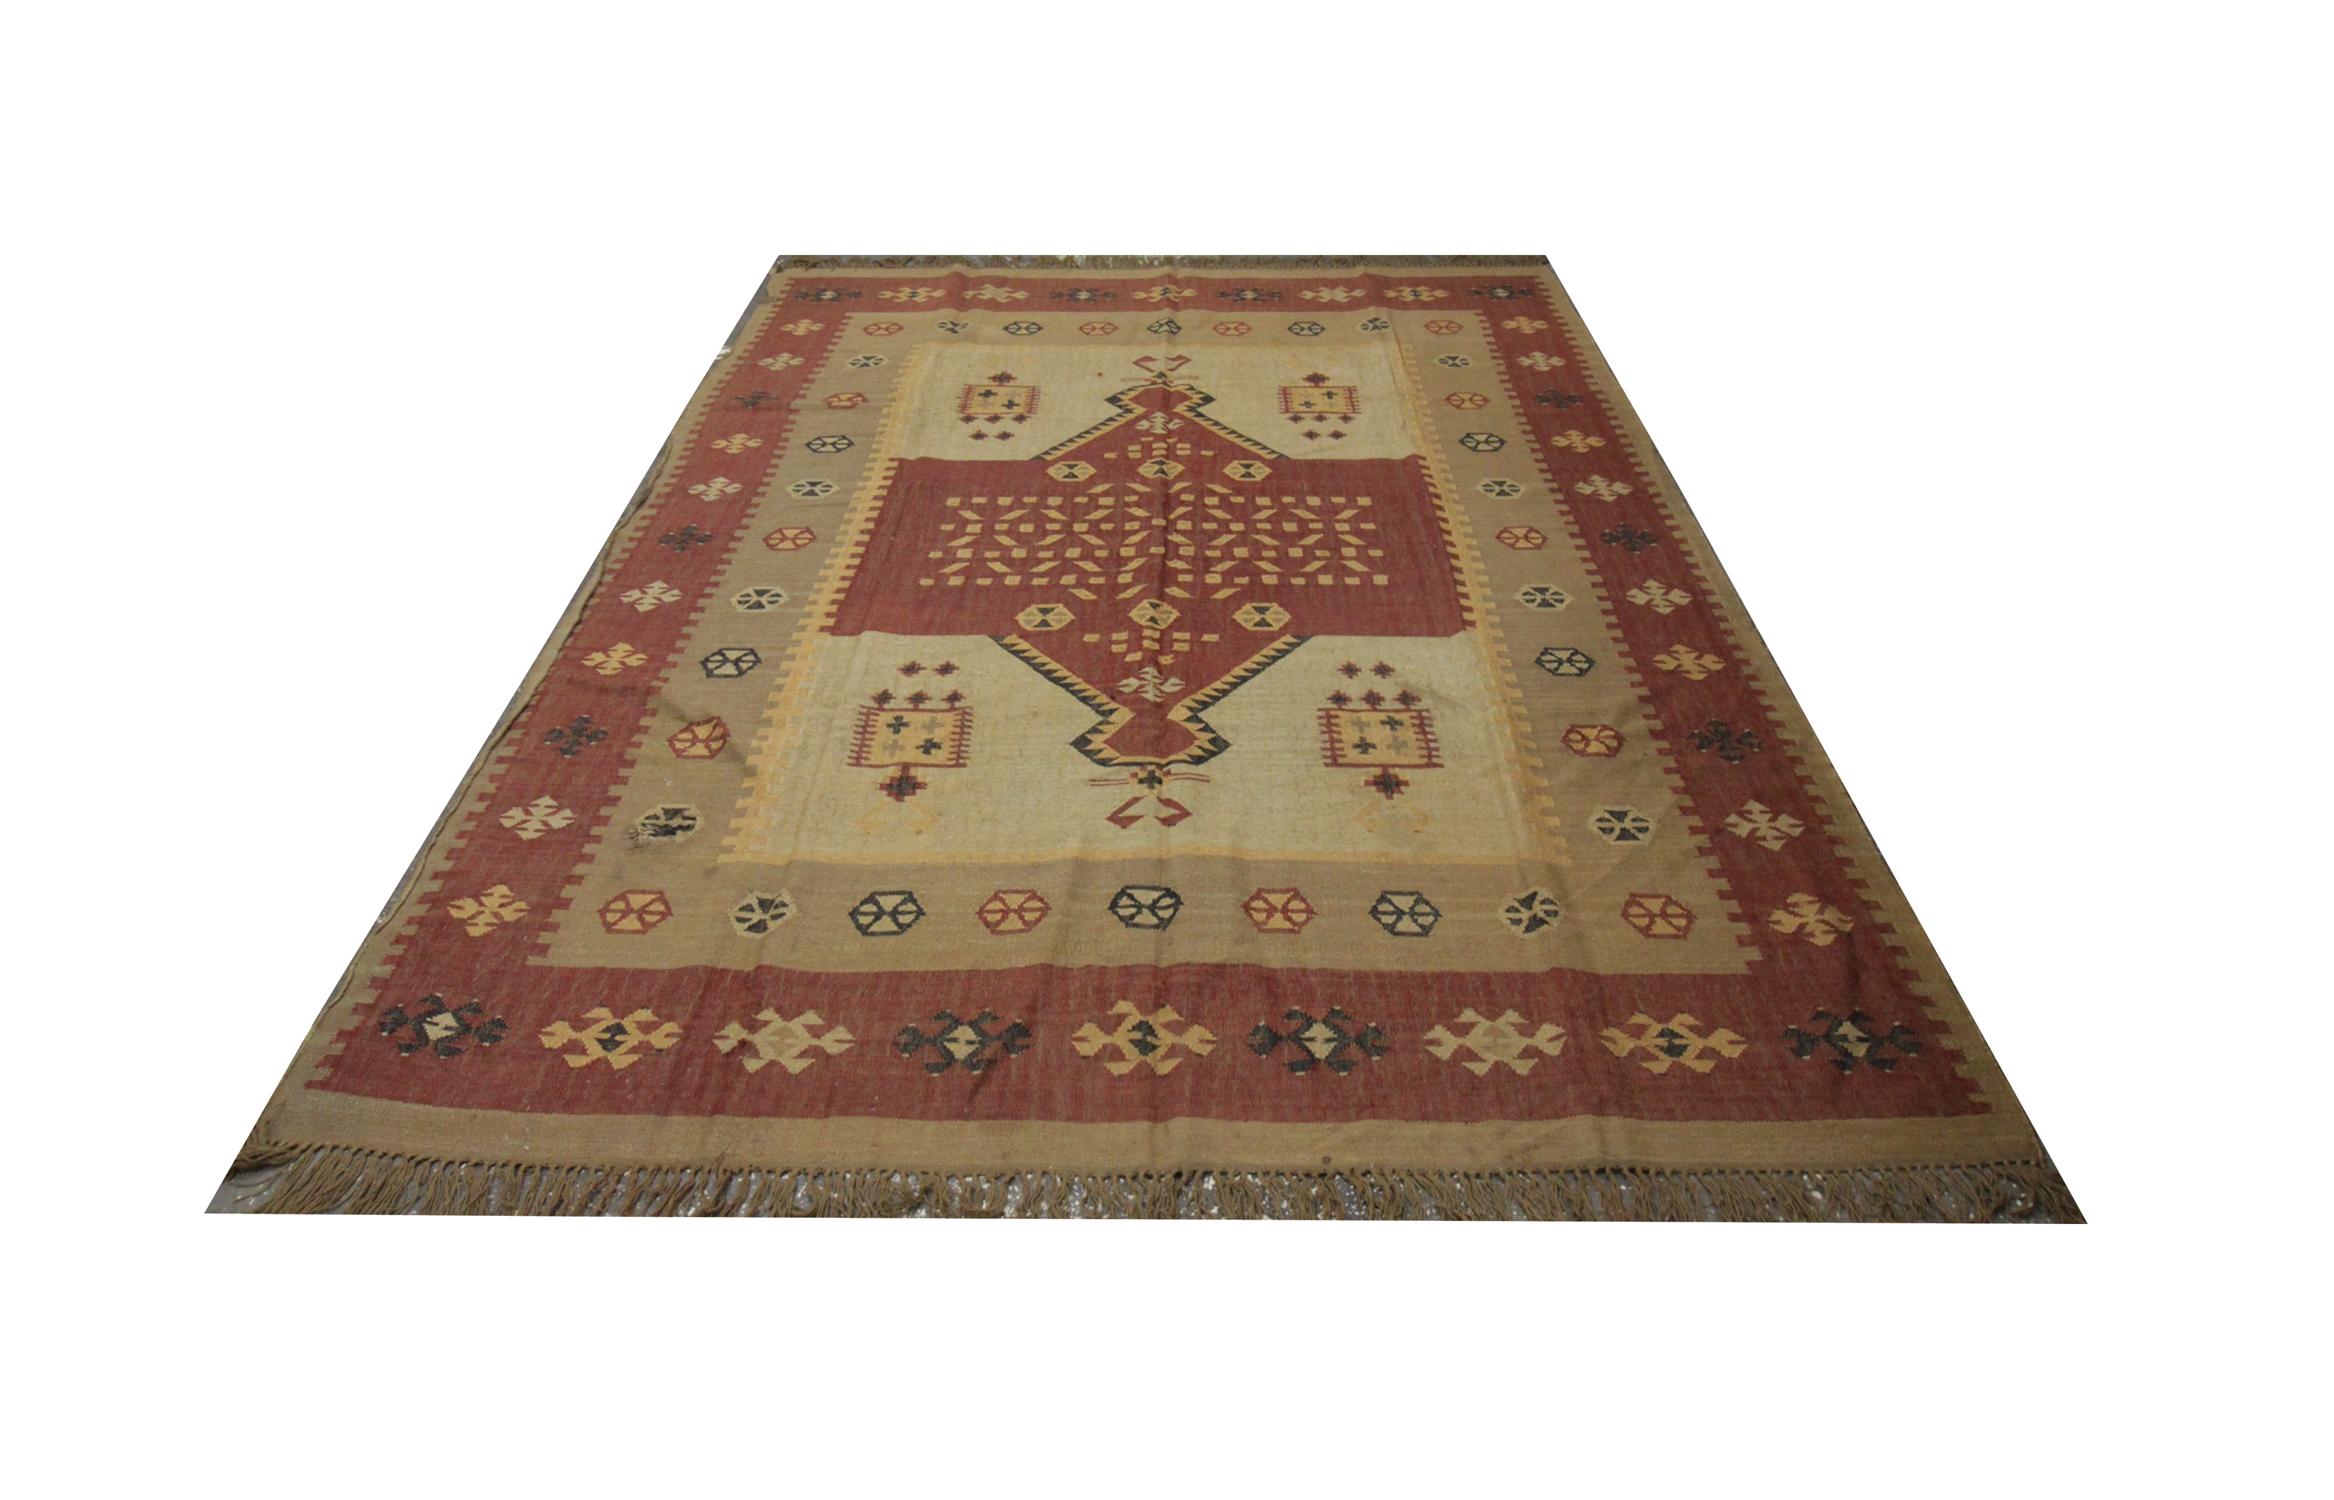 This traditional Indian Kilim area rug features muted neutral tones of beige, brown and Burgandy, the central medallion is a geometric emblem with further details interwoven in the center. This design is then enclosed by a detailed repeat pattern